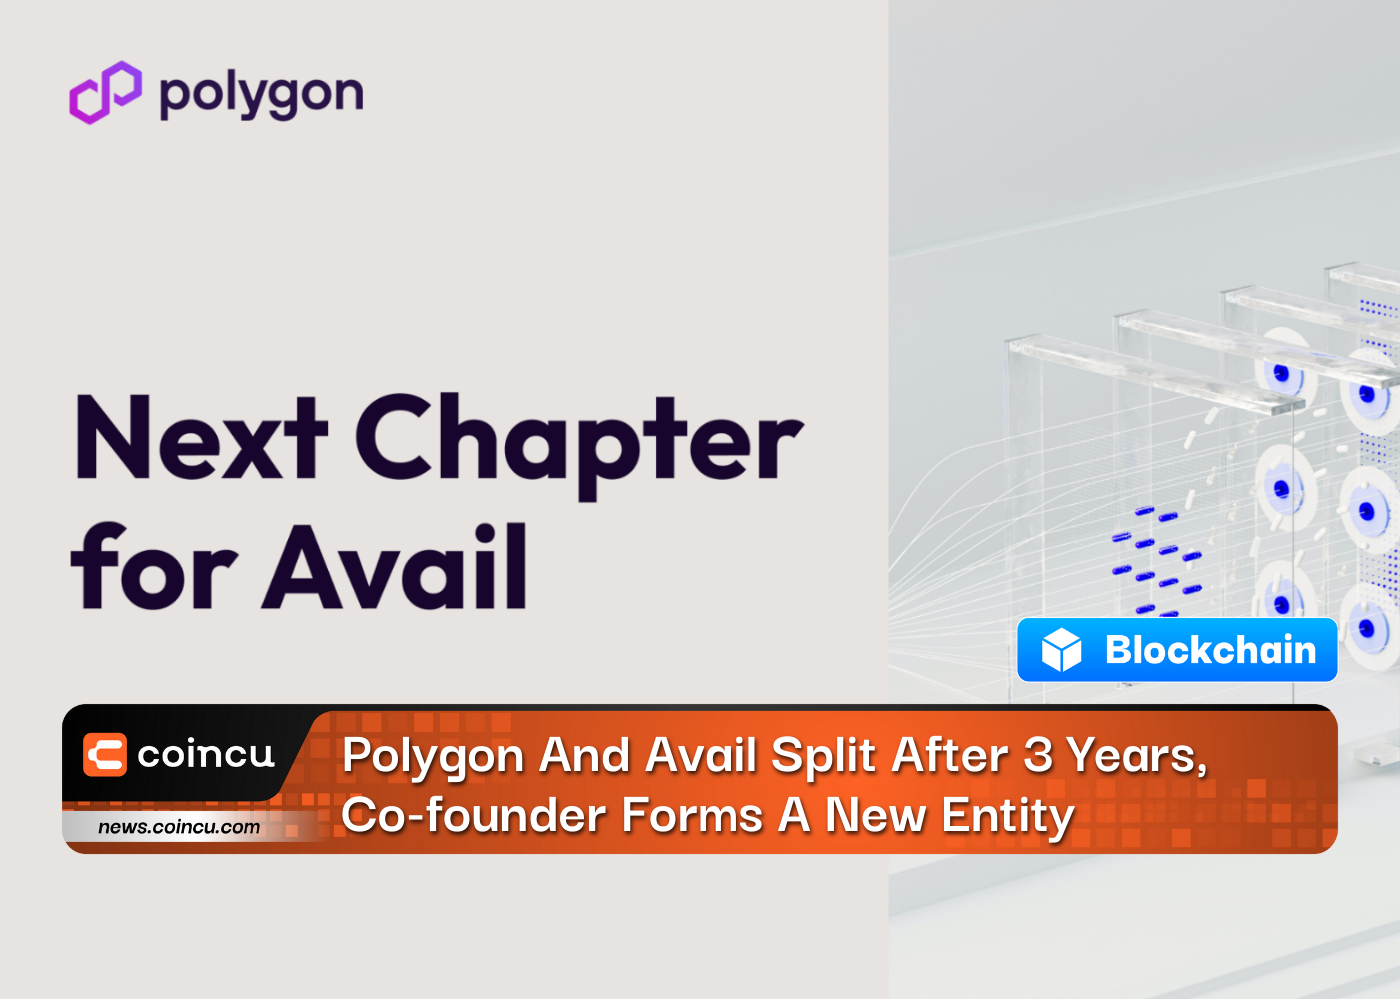 Polygon And Avail Split After 3 Years, Co-founder Forms A New Entity